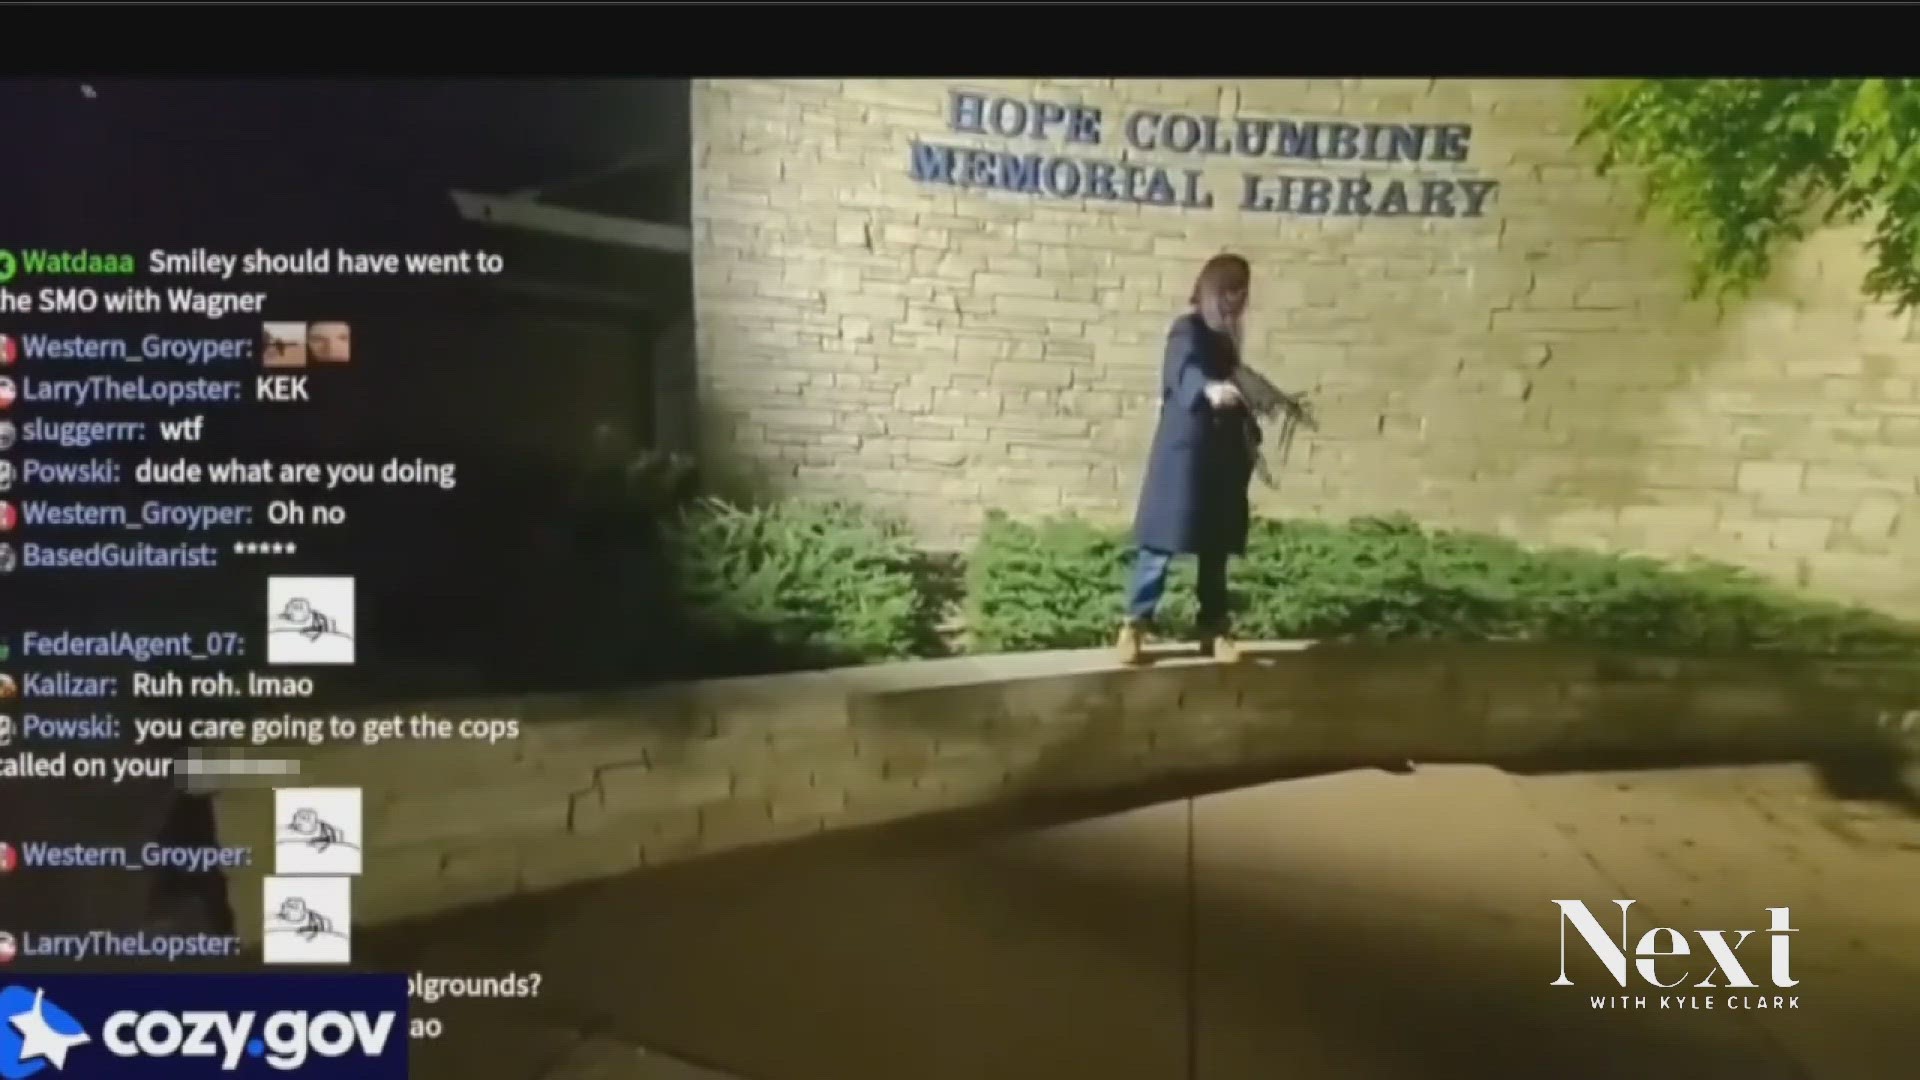 Investigators got calls last night about a livestream of two men on the Columbine campus with guns, who were talking about the 1999 shooting being a "false flag."